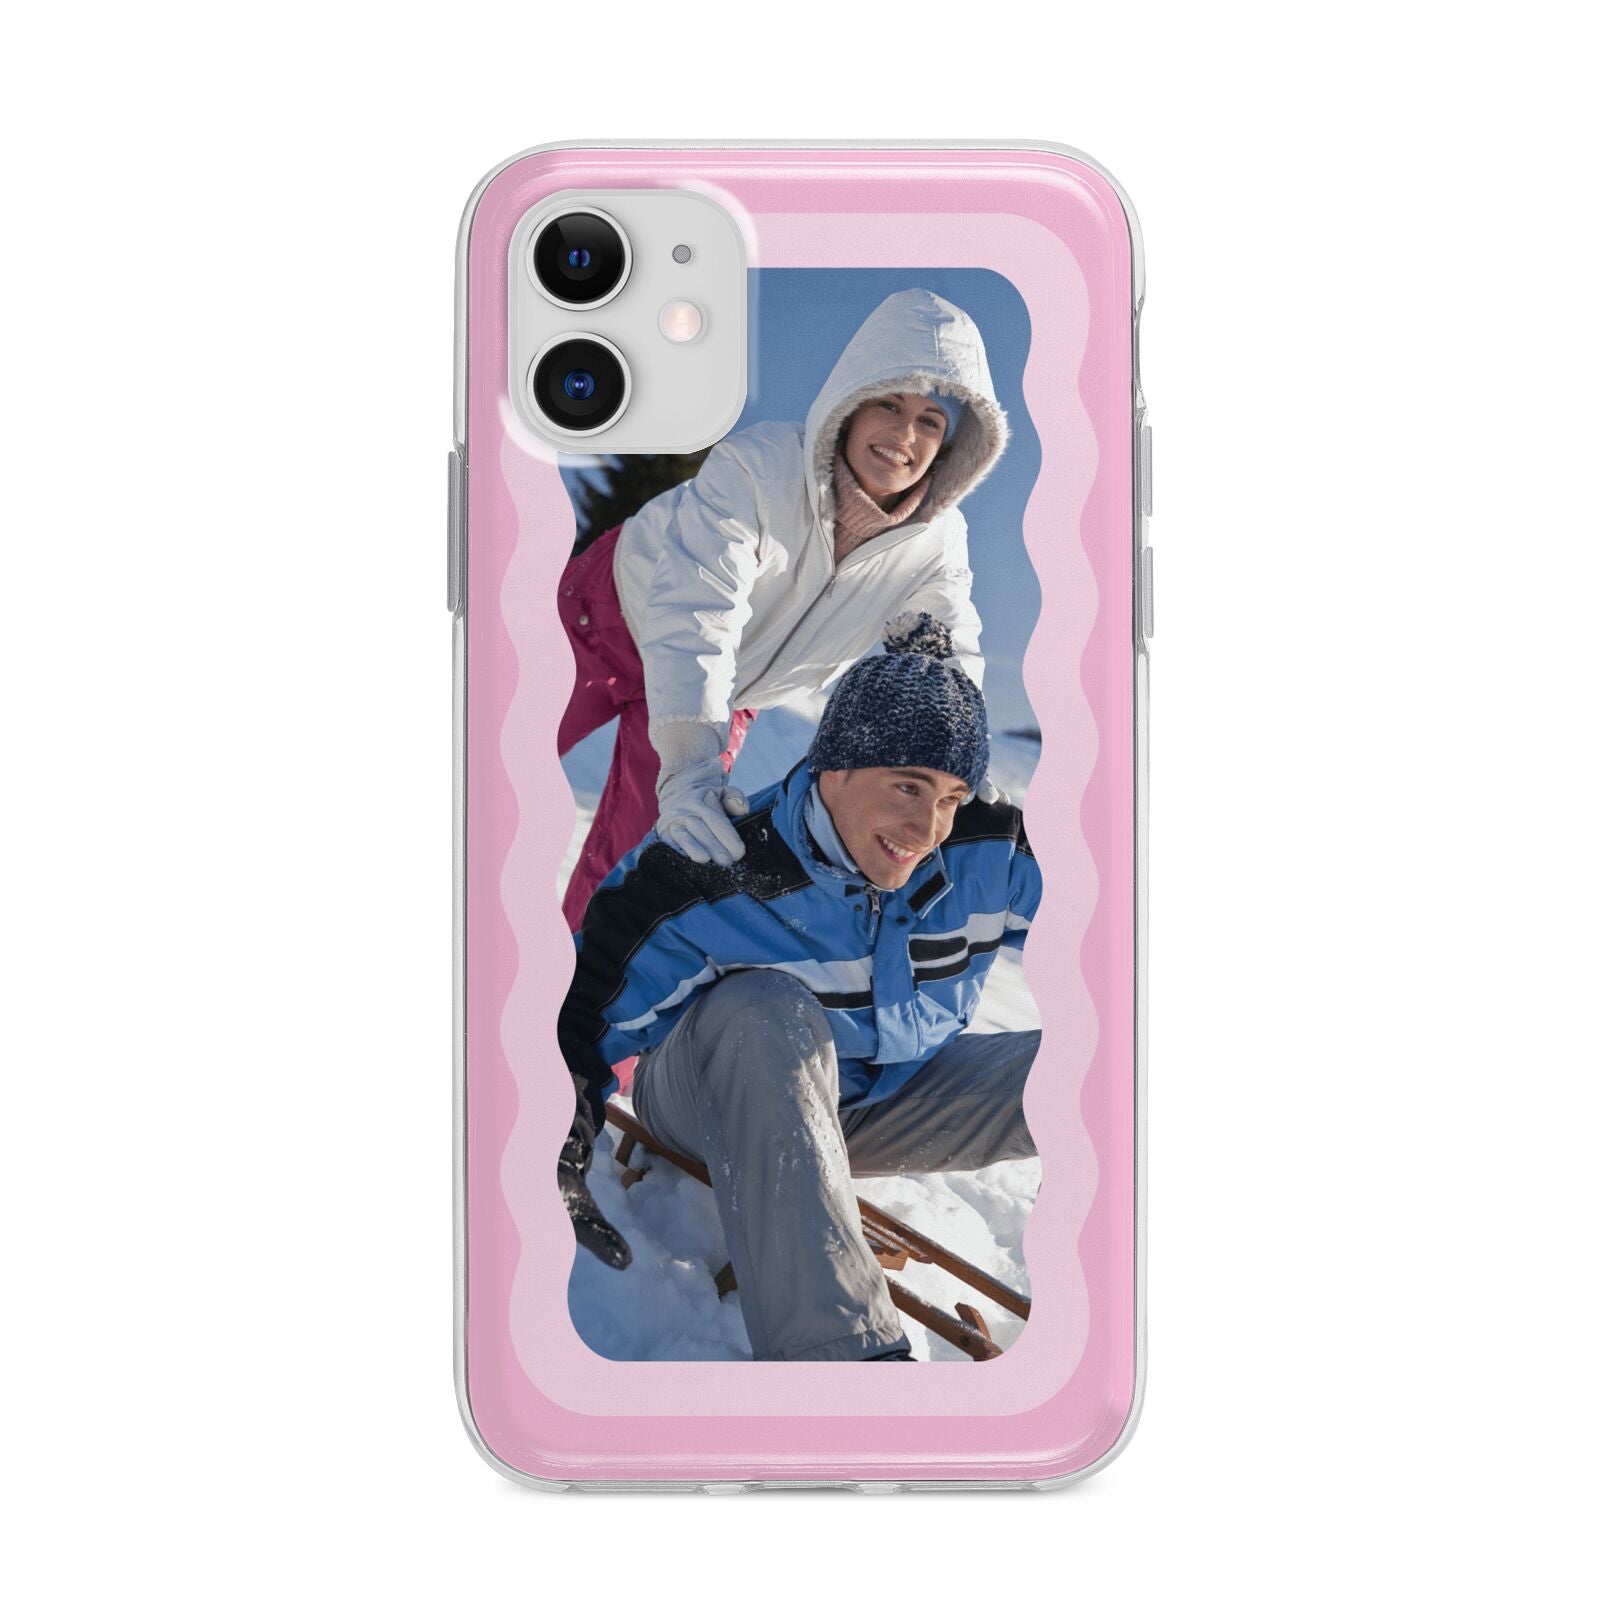 Wavy Photo Border Apple iPhone 11 in White with Bumper Case